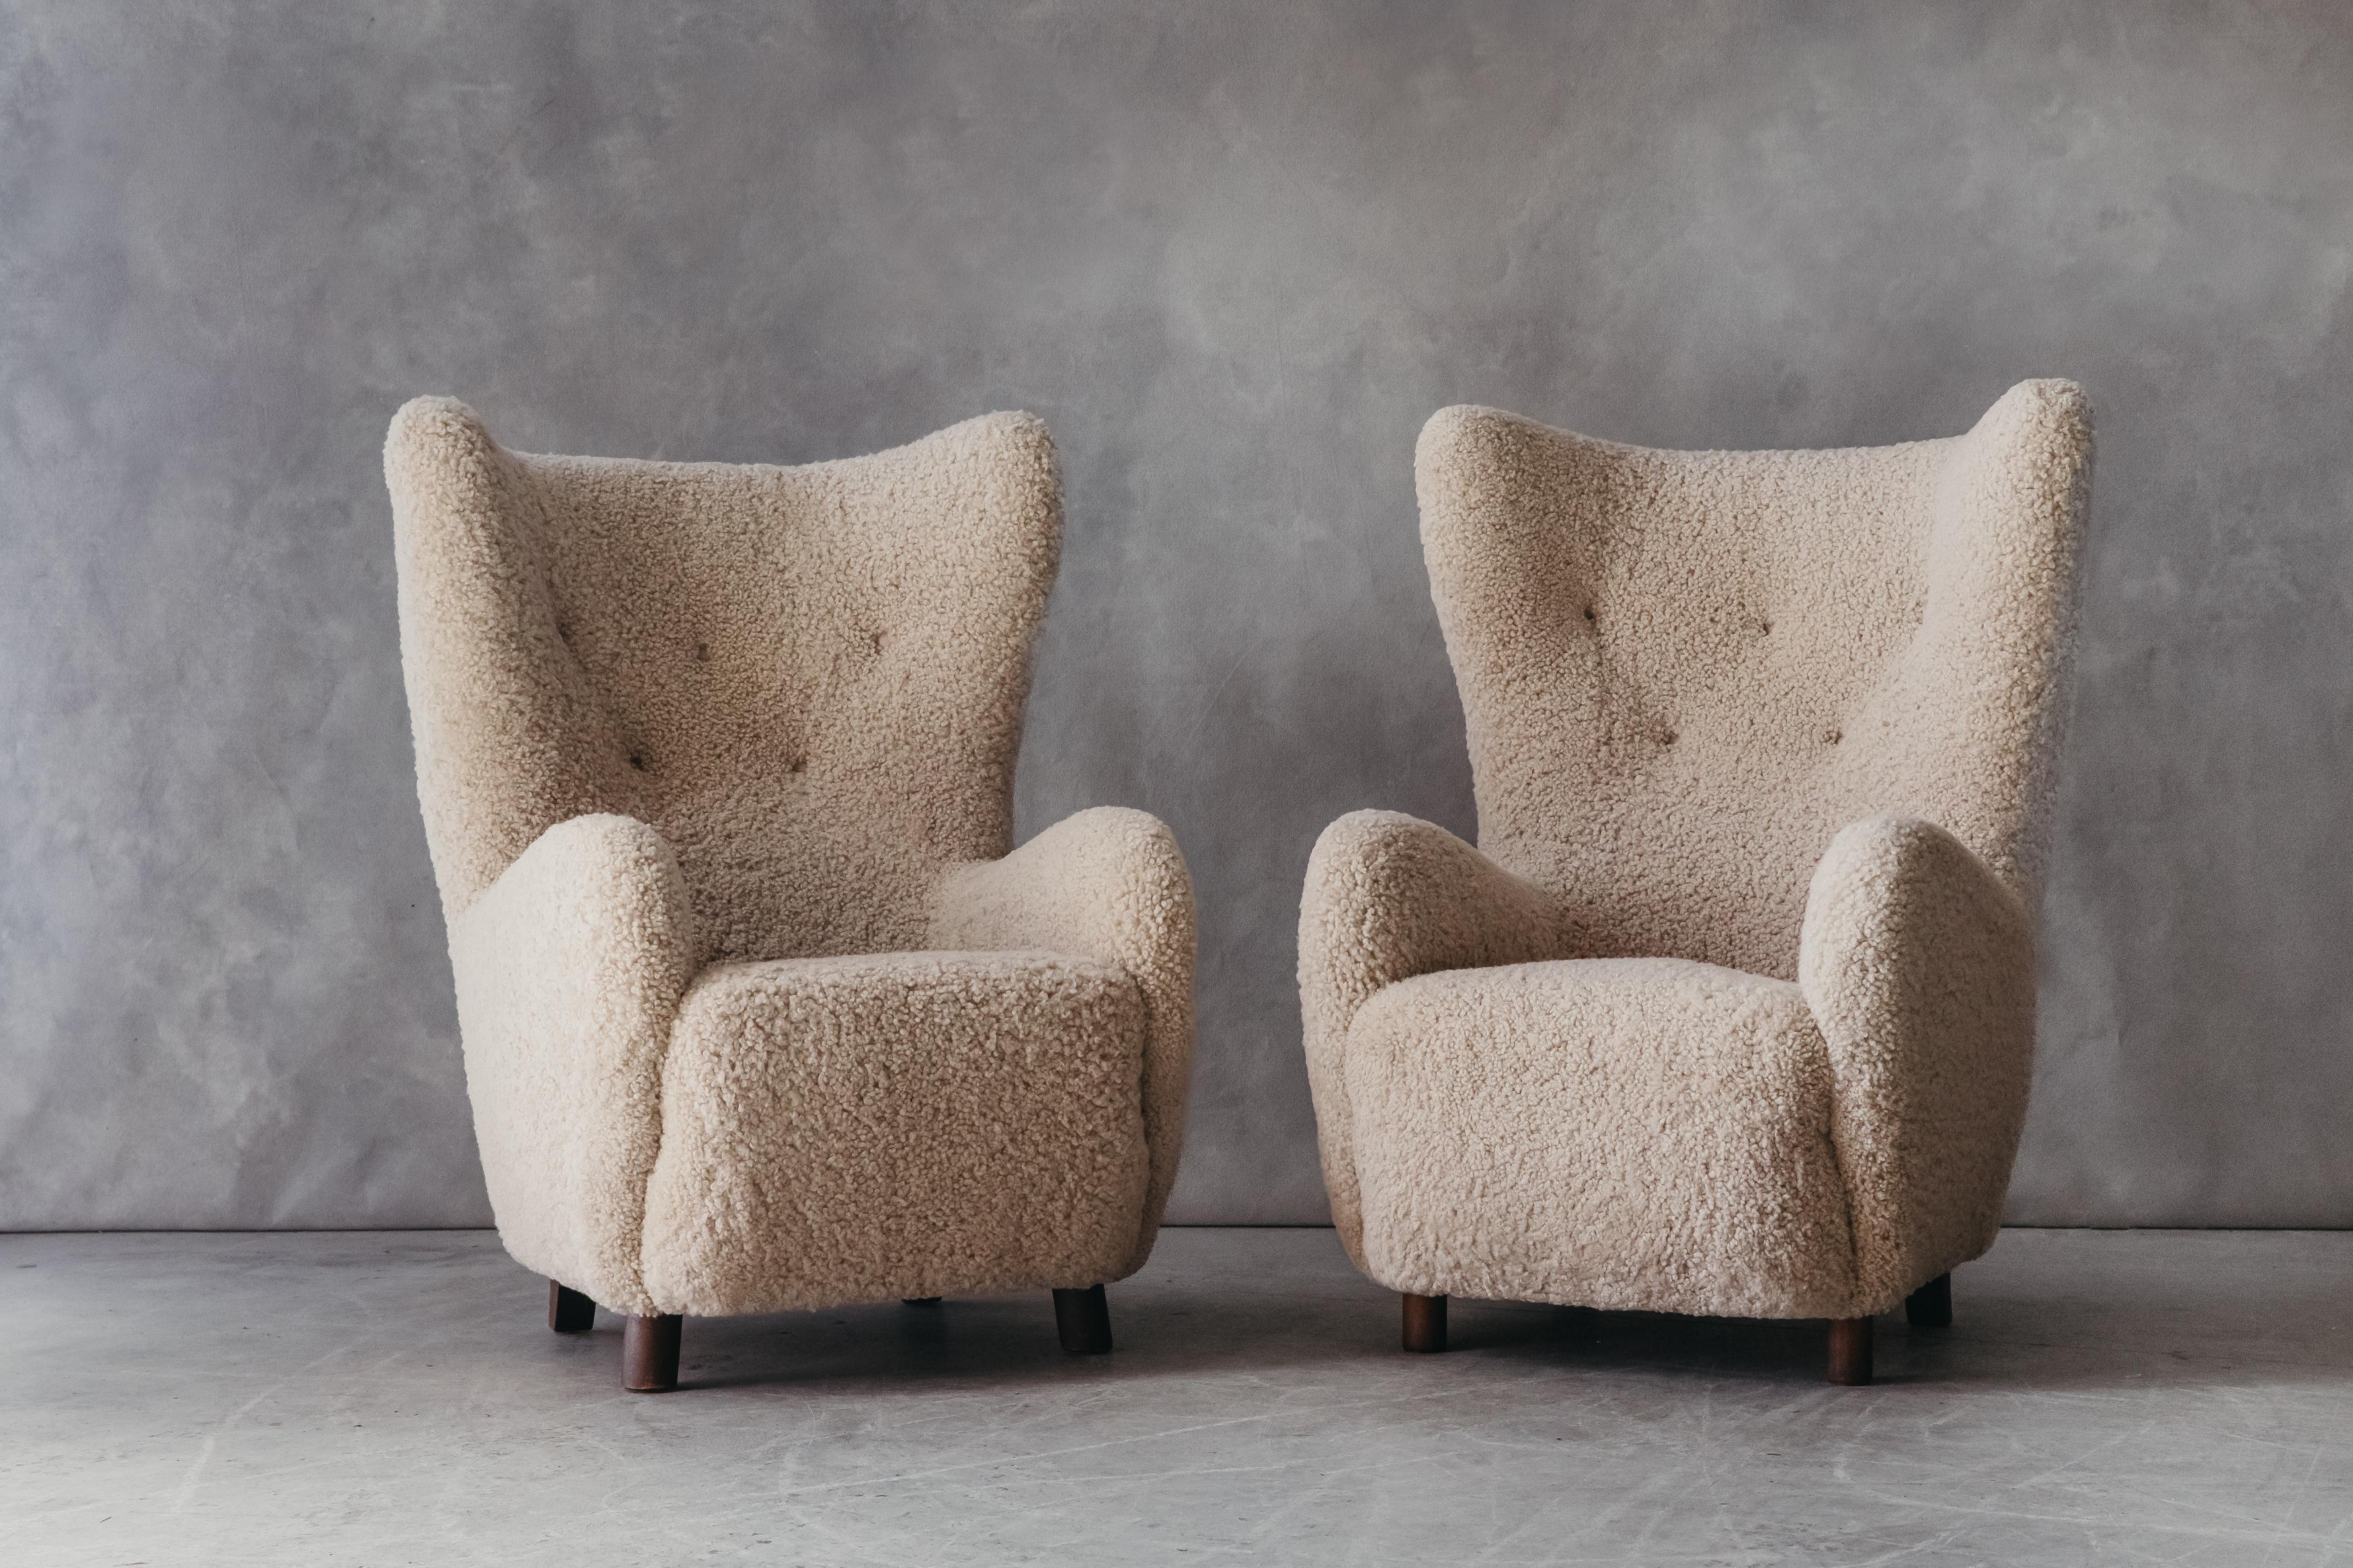 Vintage Pair Of Mogens Lassen Wingback Chairs From Denmark, Circa 1950. Superb pair later upholstered in very soft, off white shearling. Excellent condition.

We don't have the time to write an extensive description on each of our pieces. We